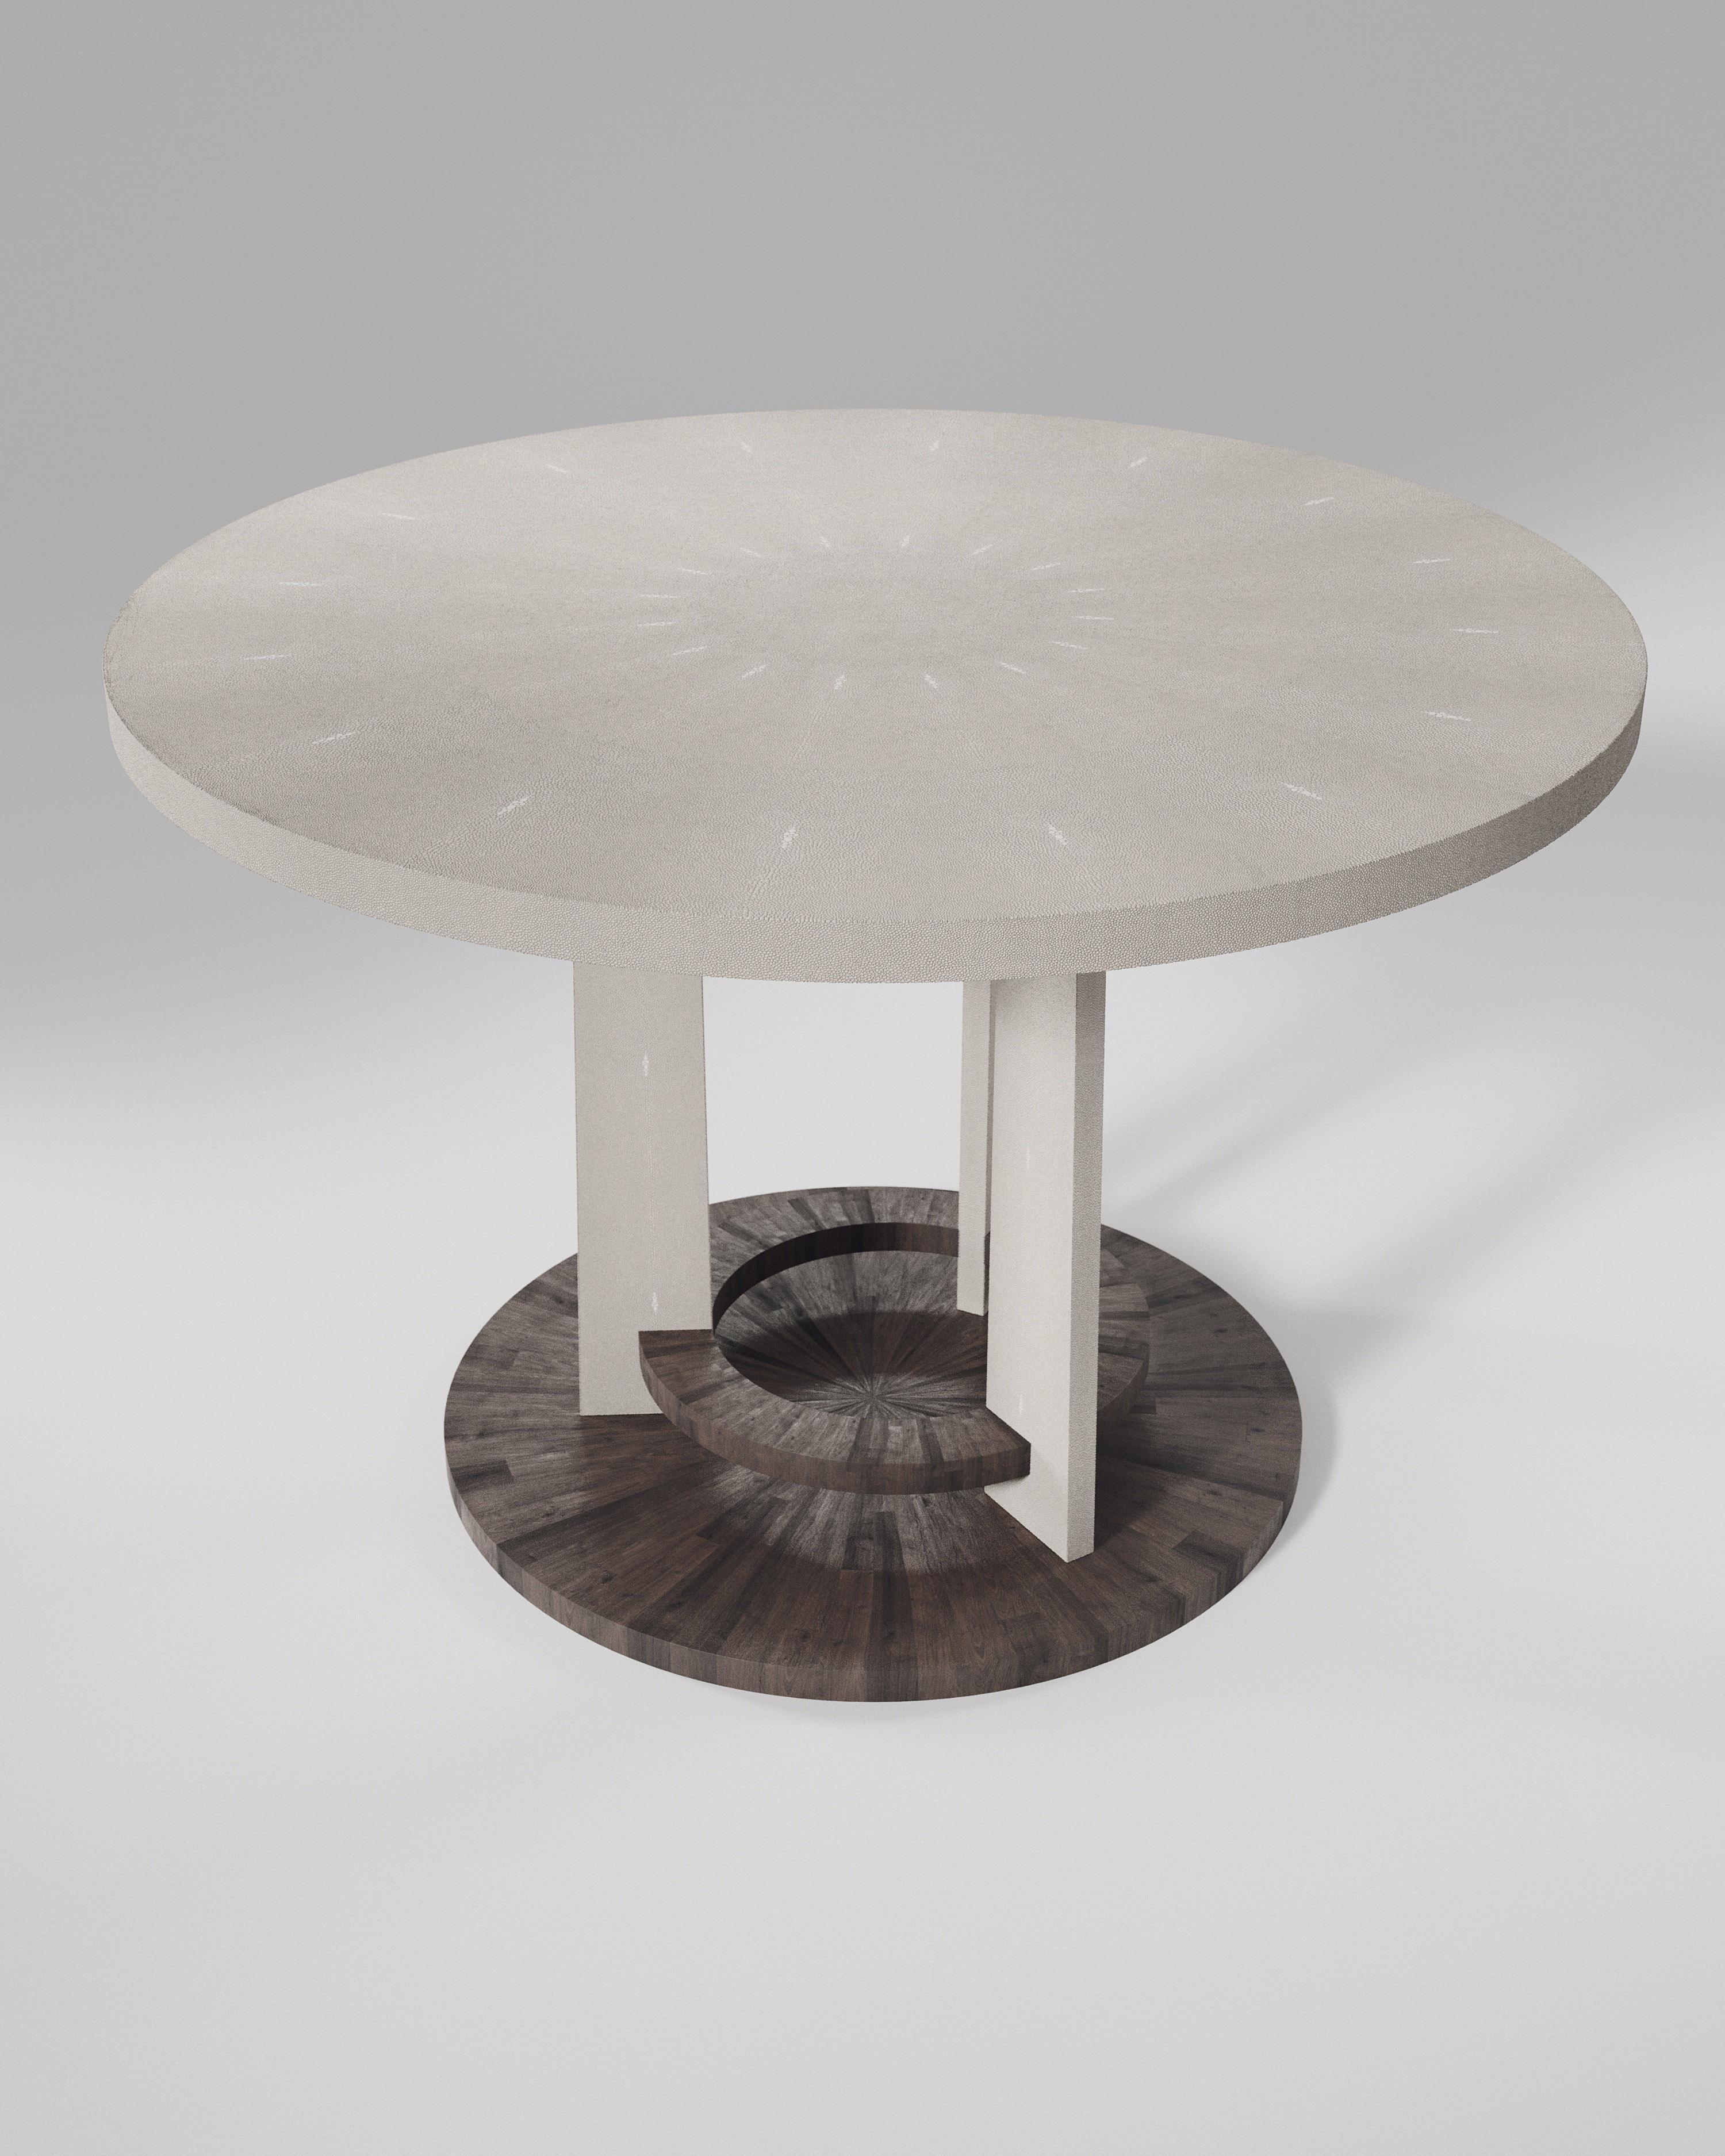 The Prague Breakfast table by R&Y Augousti is an iconic design of their collection, debuting from the 1990s. This classic centre piece can be adapted for an entrance room or custom-sized for a dining room. The circular shaped cream shagreen inlaid